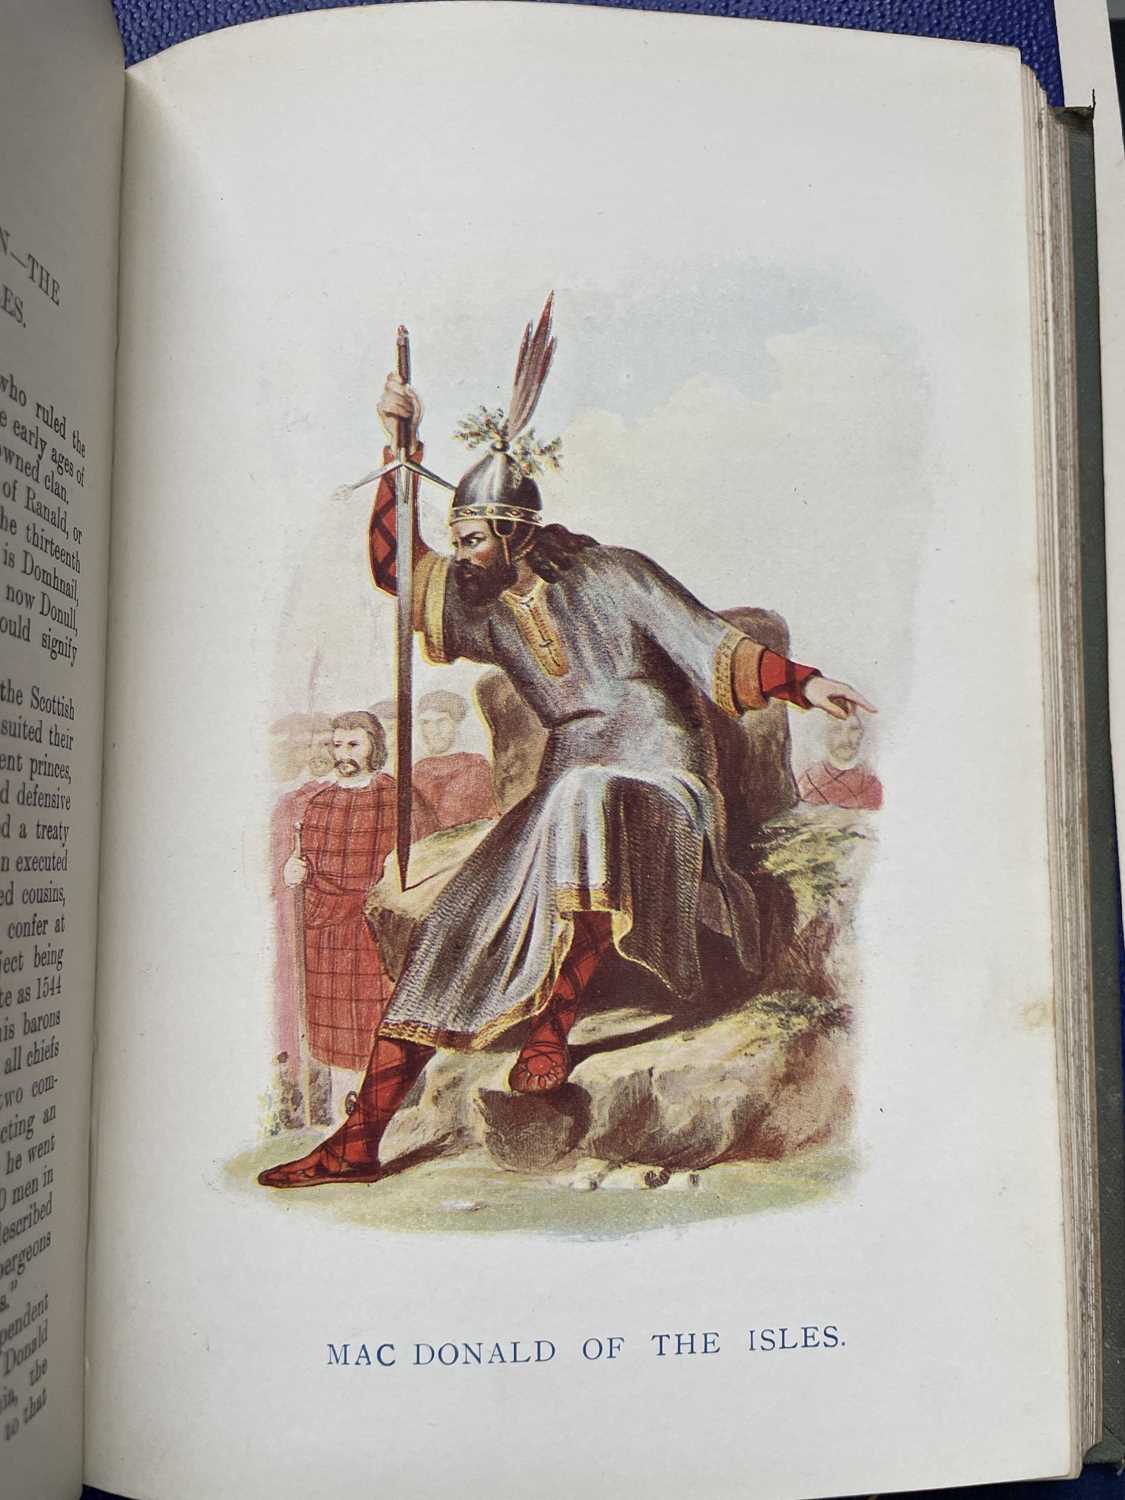 McIAN’S COSTUMES OF THE CLANS OF SCOTLAND By James Logan (1845) - Image 7 of 9